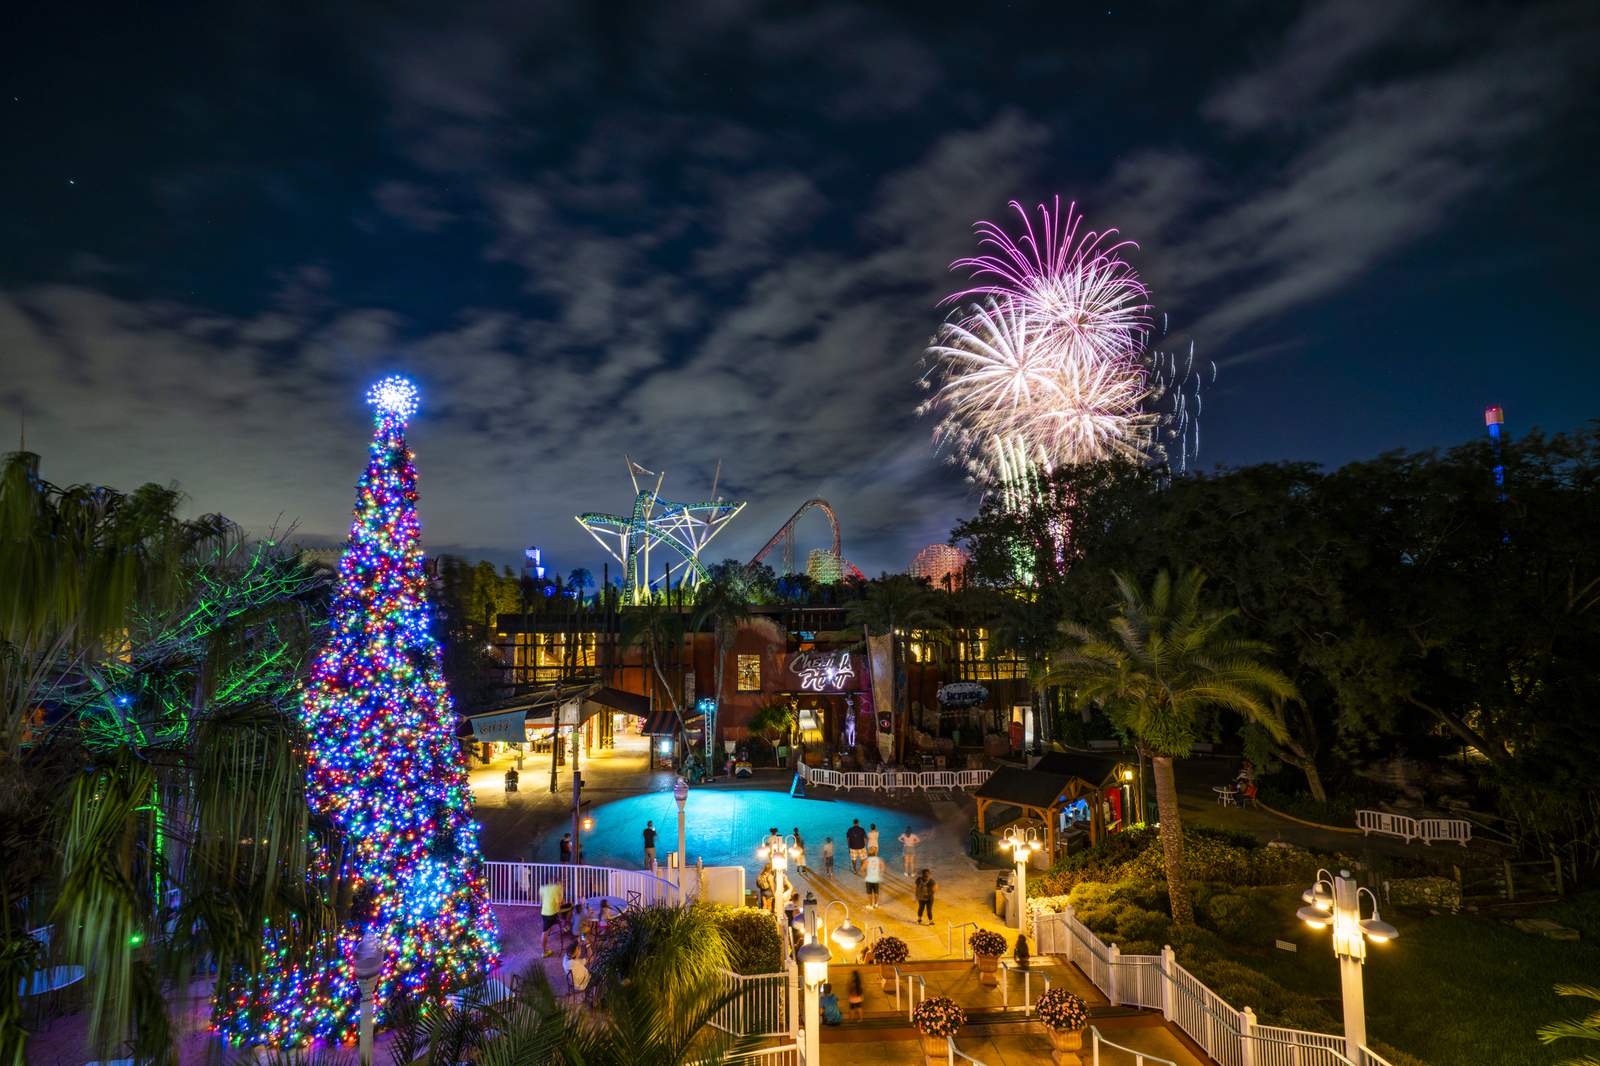 Busch Gardens Tampa Bay details New Year’s Eve celebrations